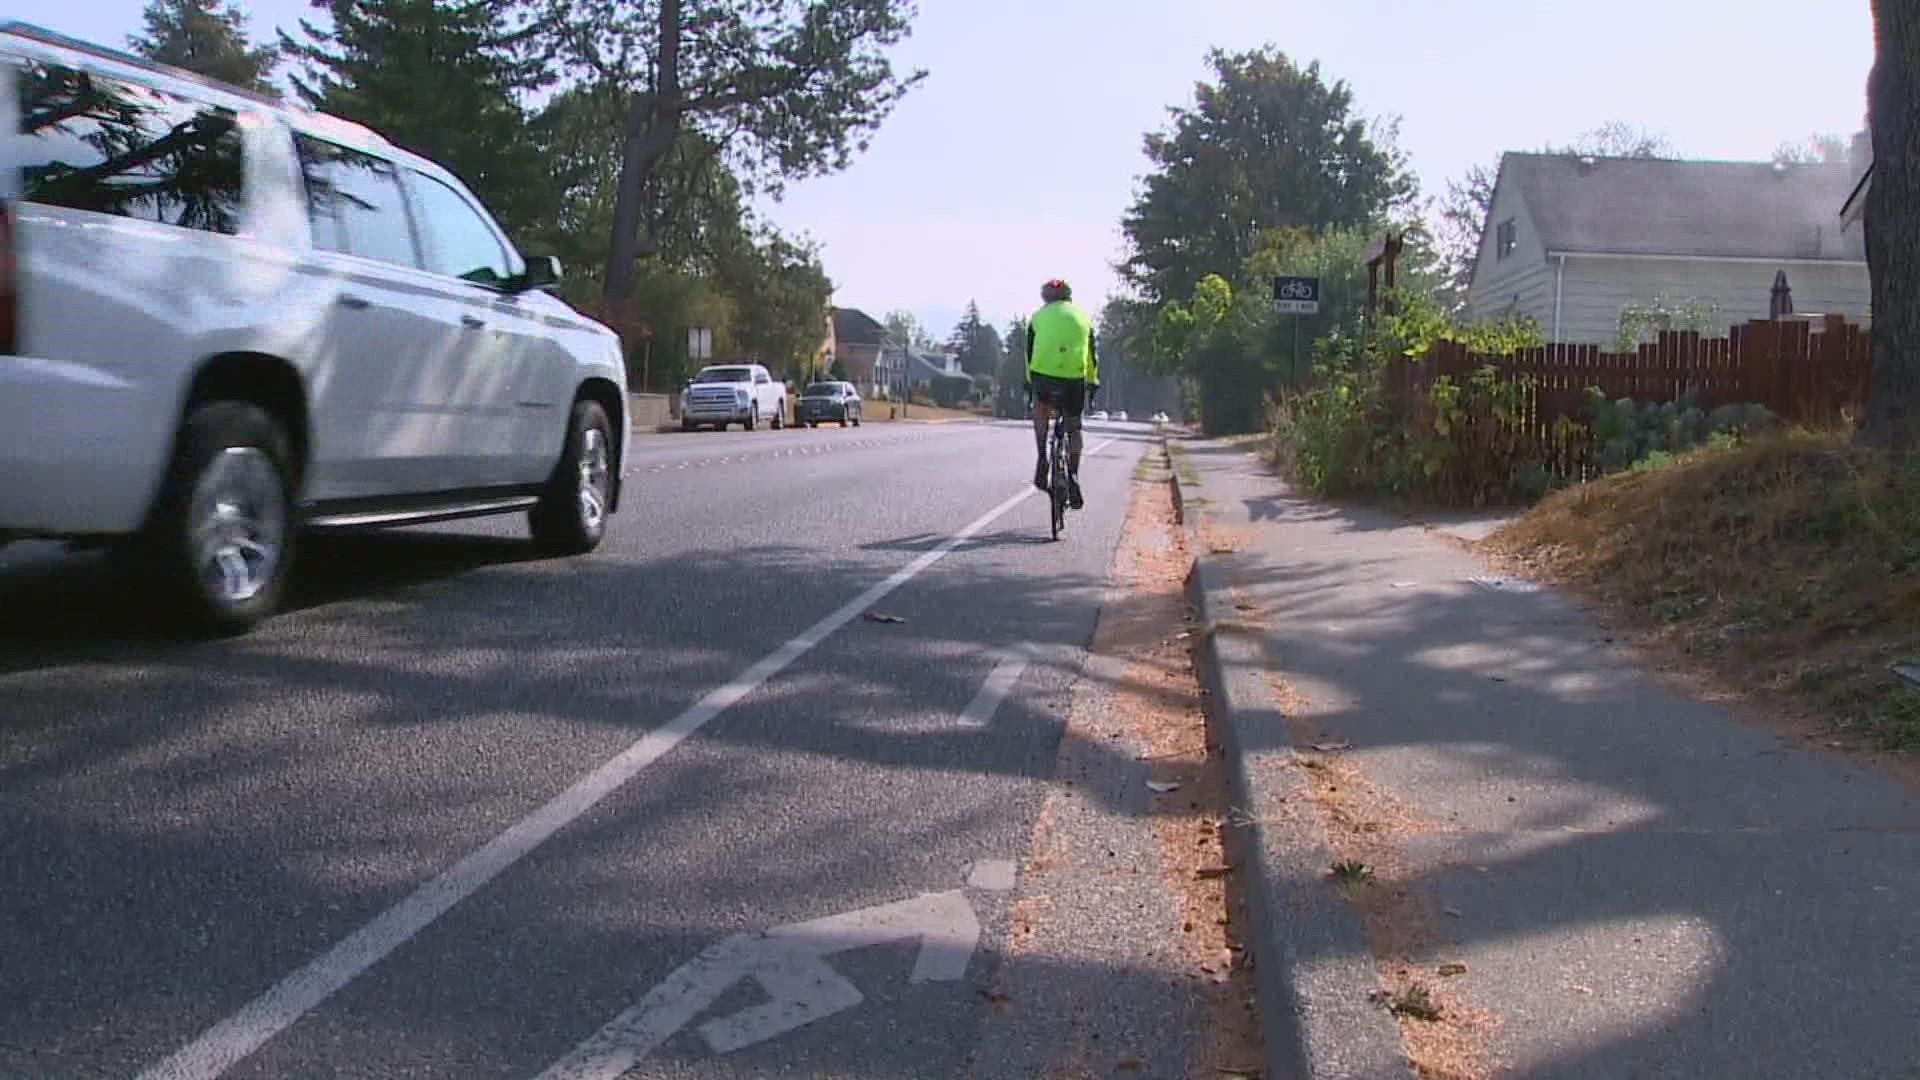 The City of Bellingham wants to take away parking and add bike lanes.